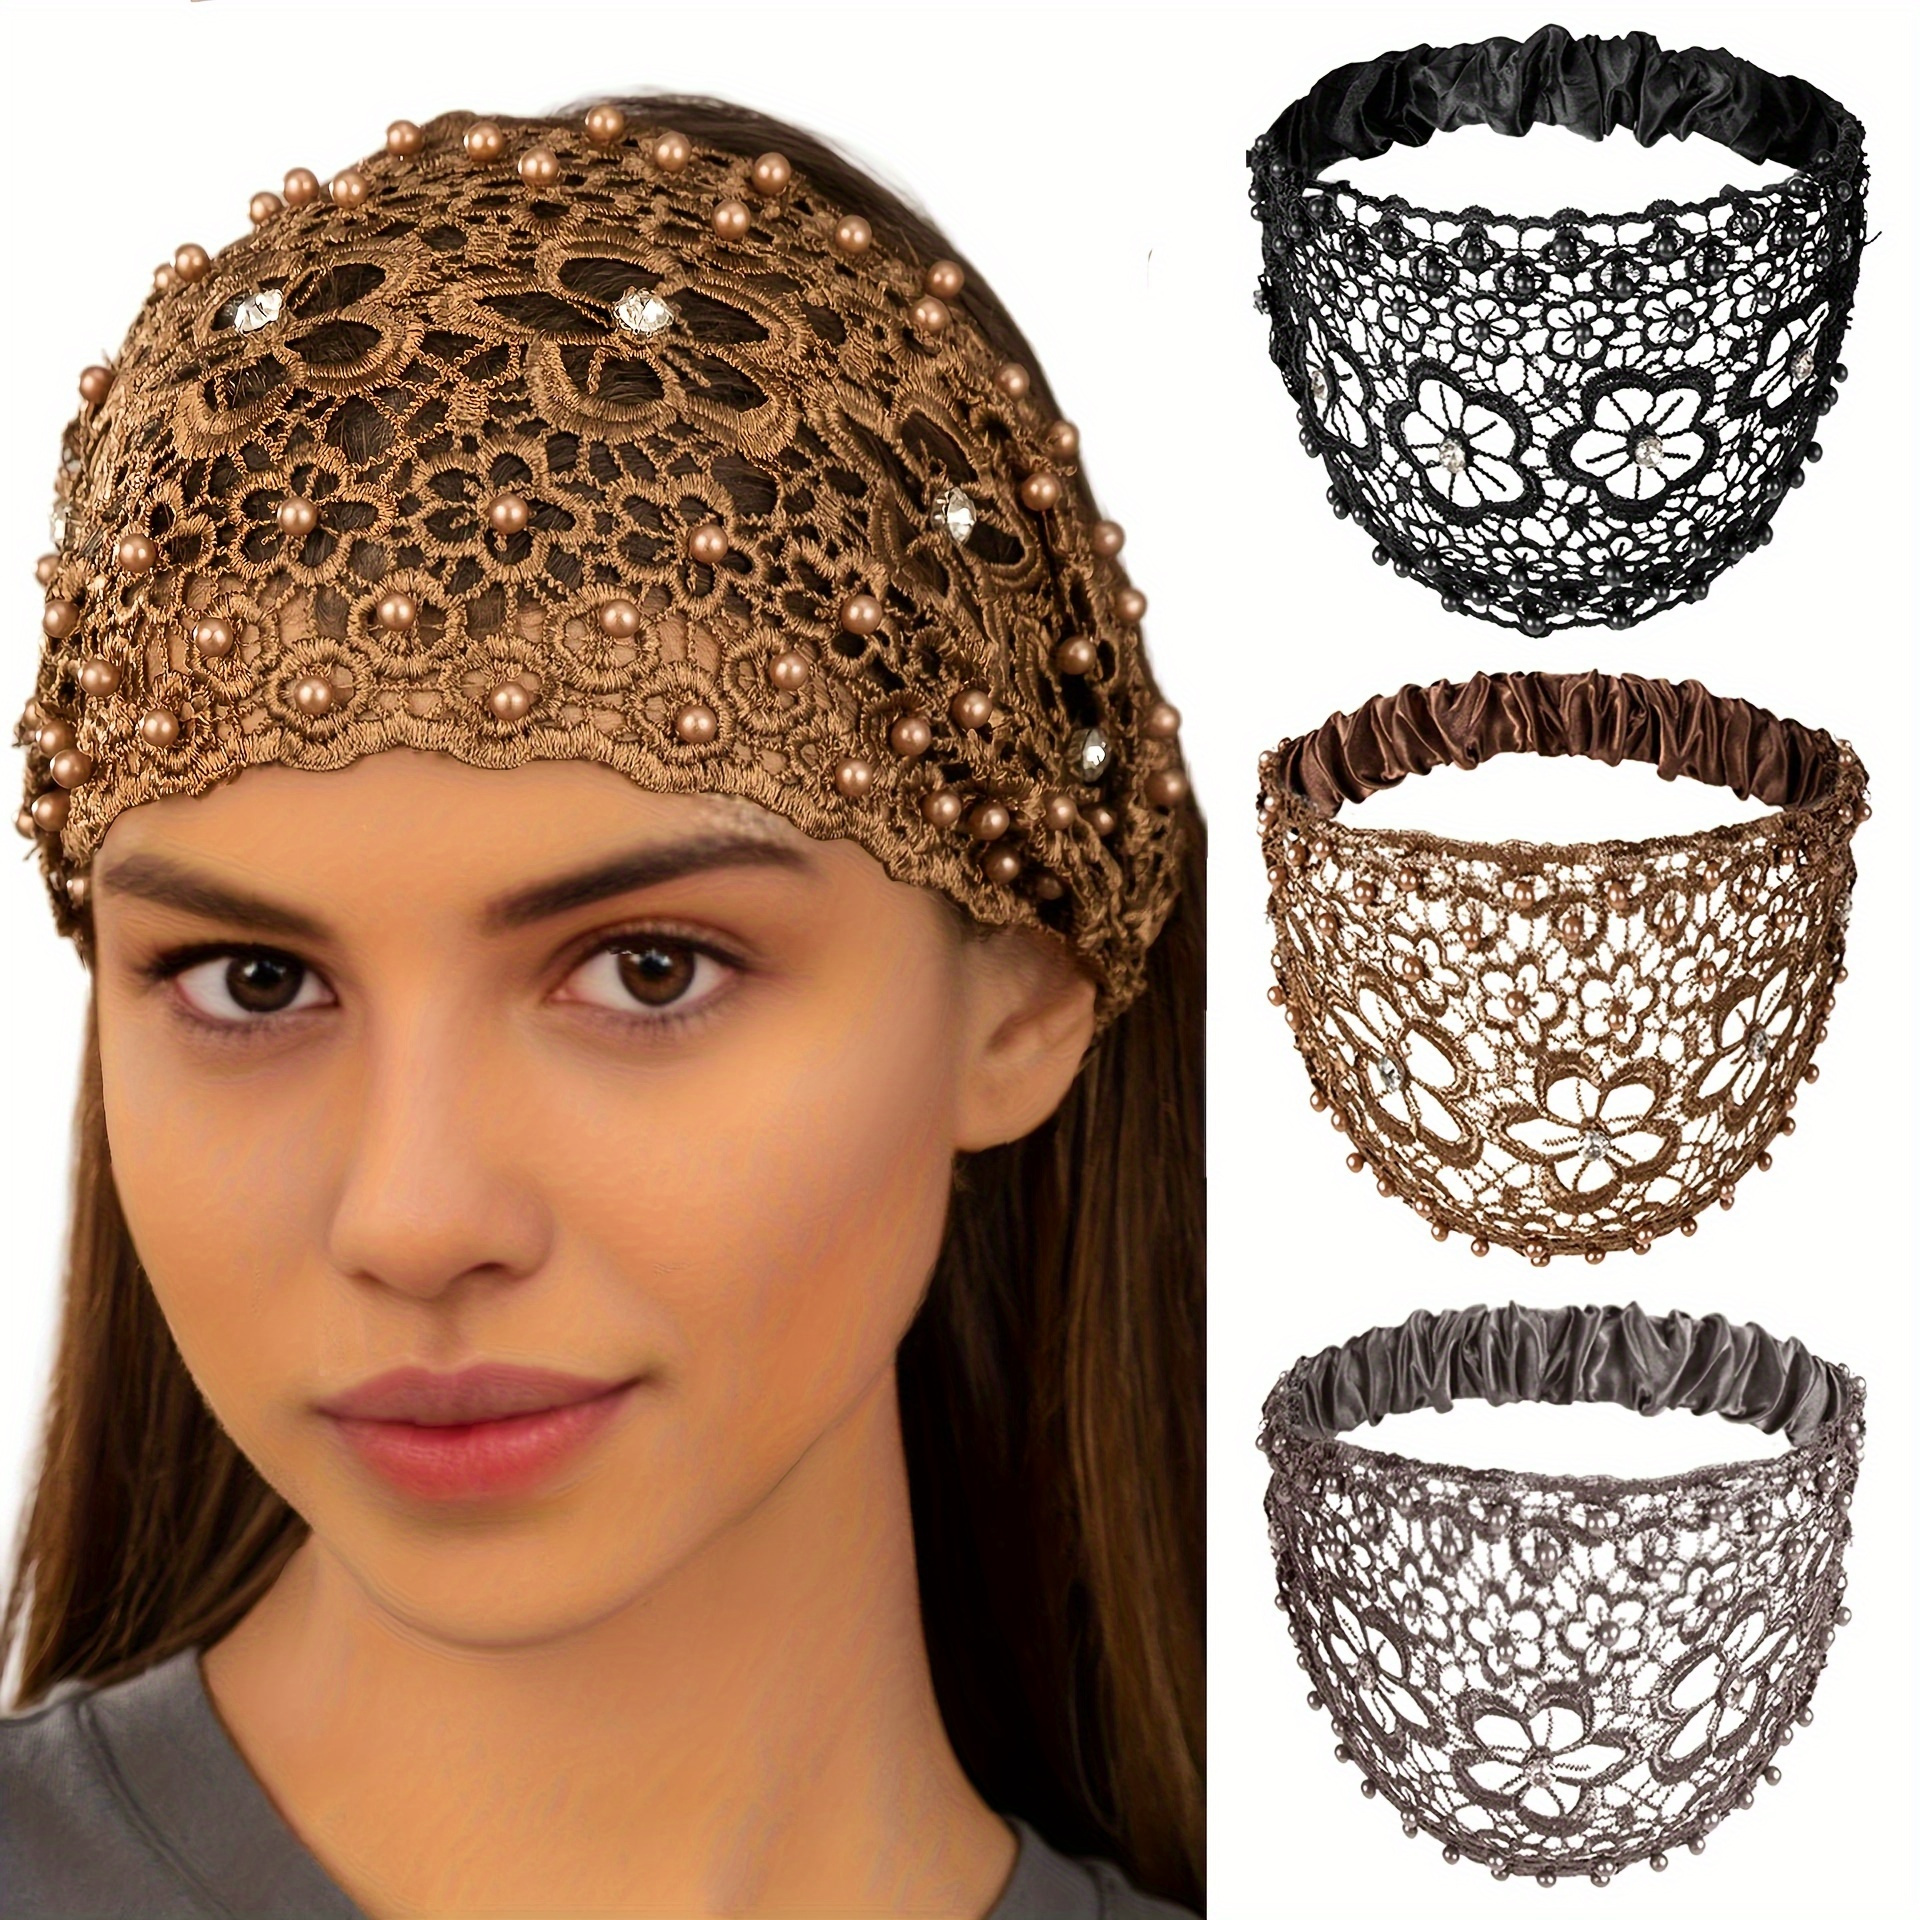 

Elegant Bohemian Lace Headbands With Faux Pearls - Pack Of 4, Knitted Stretch Headwraps For Women